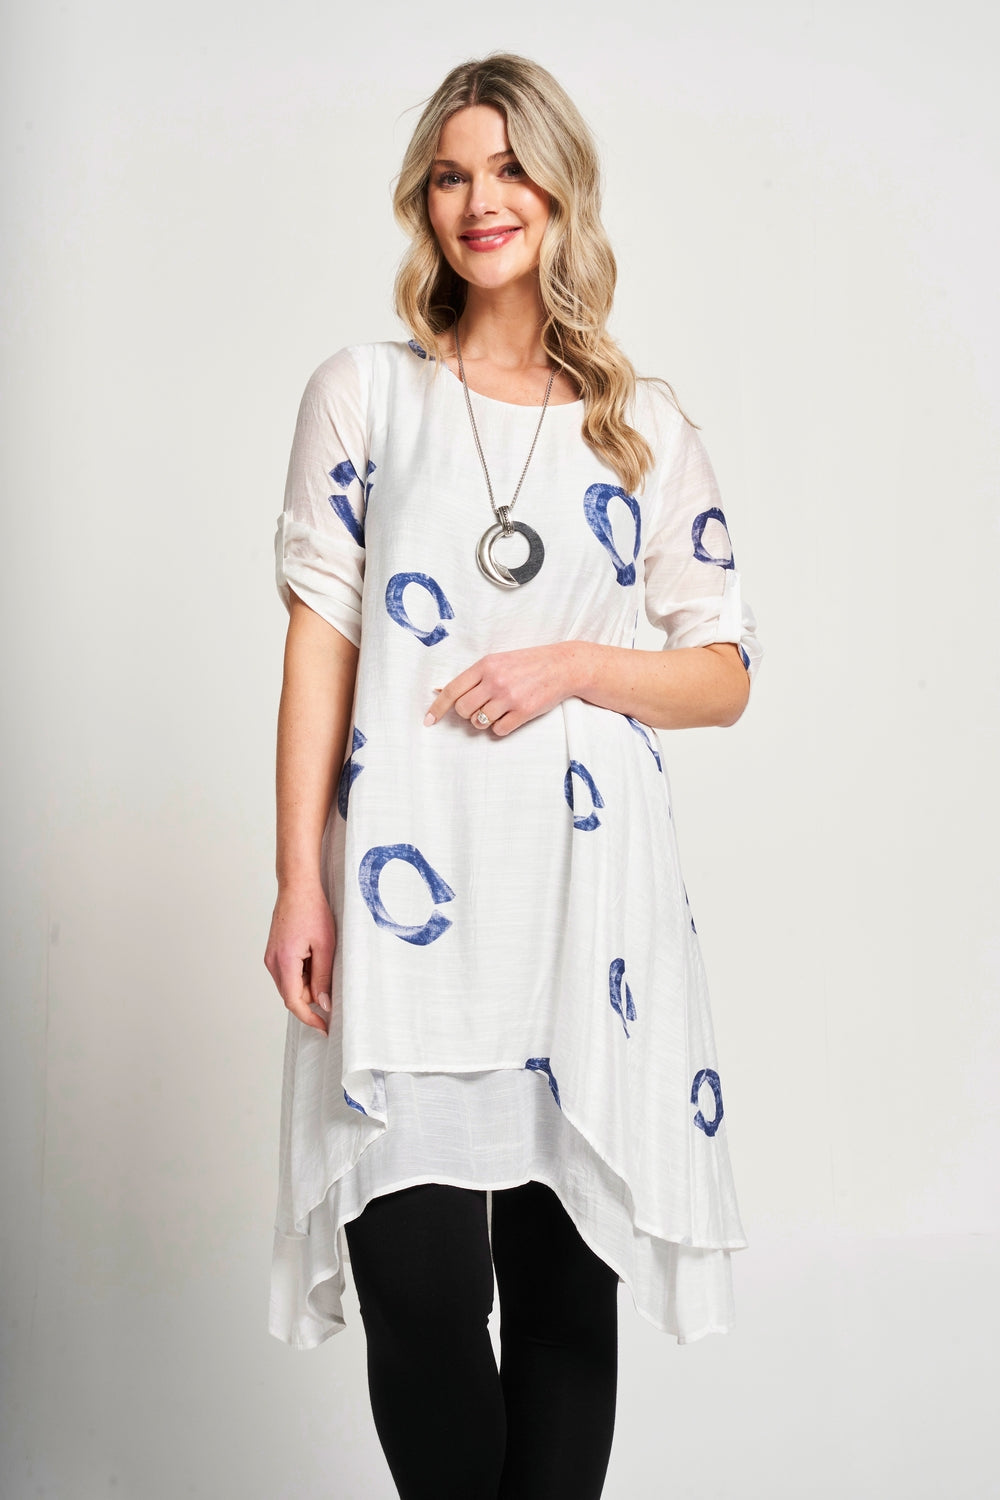 Saloos A-line Double Layer Dress with Necklace